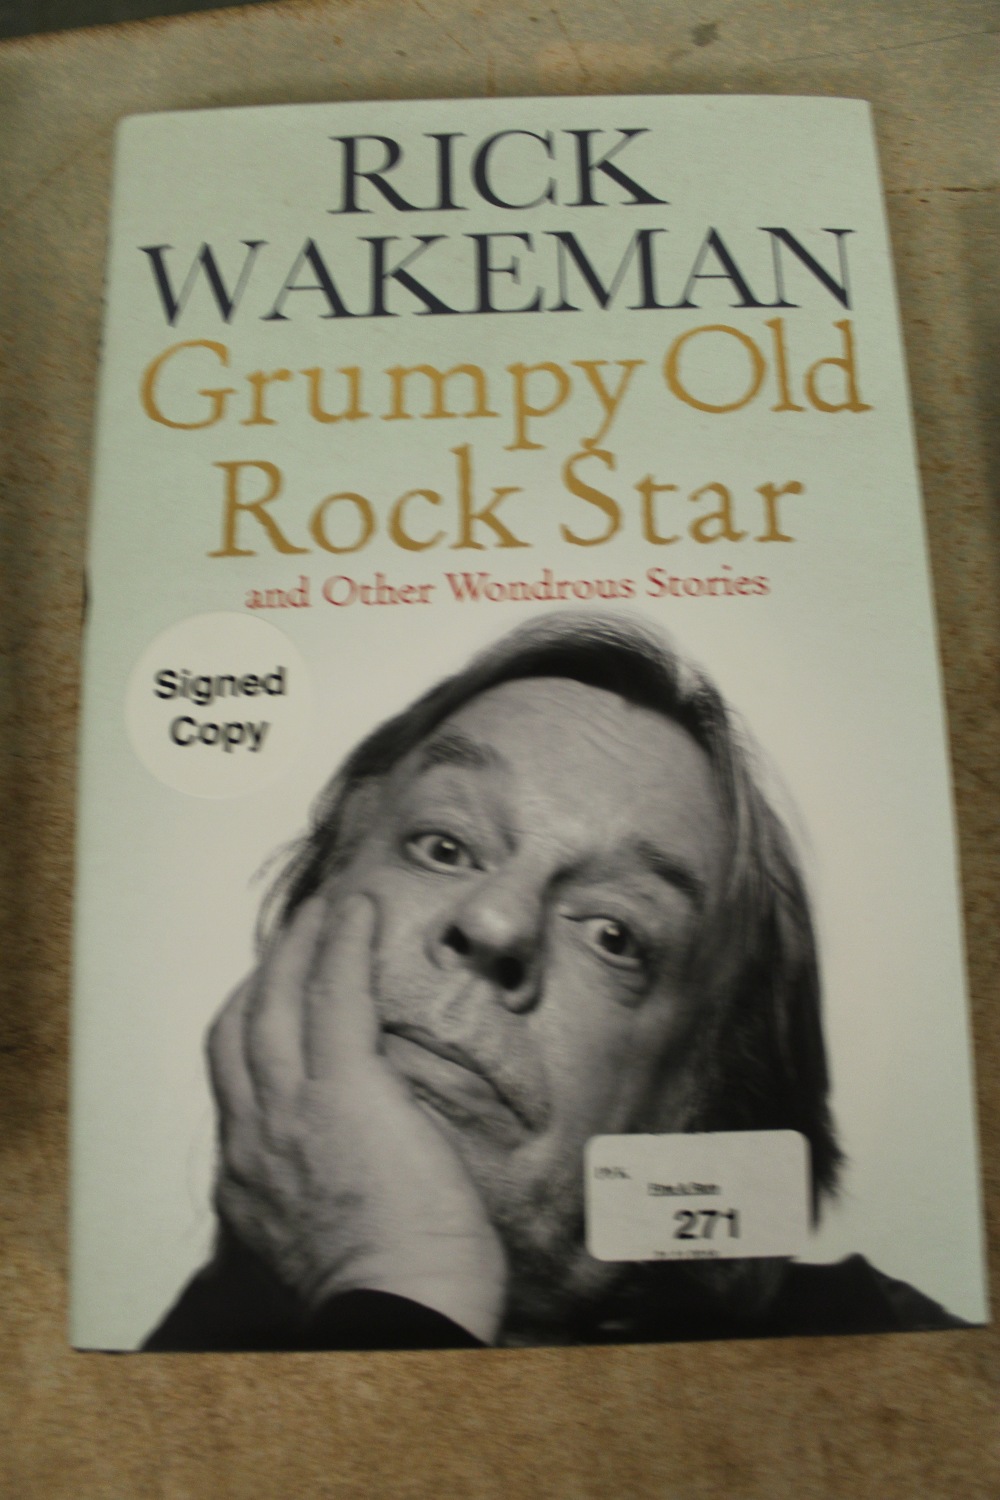 Wakeman [Rick] - Grumpy Old Rock Star, signed first edition 2008, hardback with dustwrapper